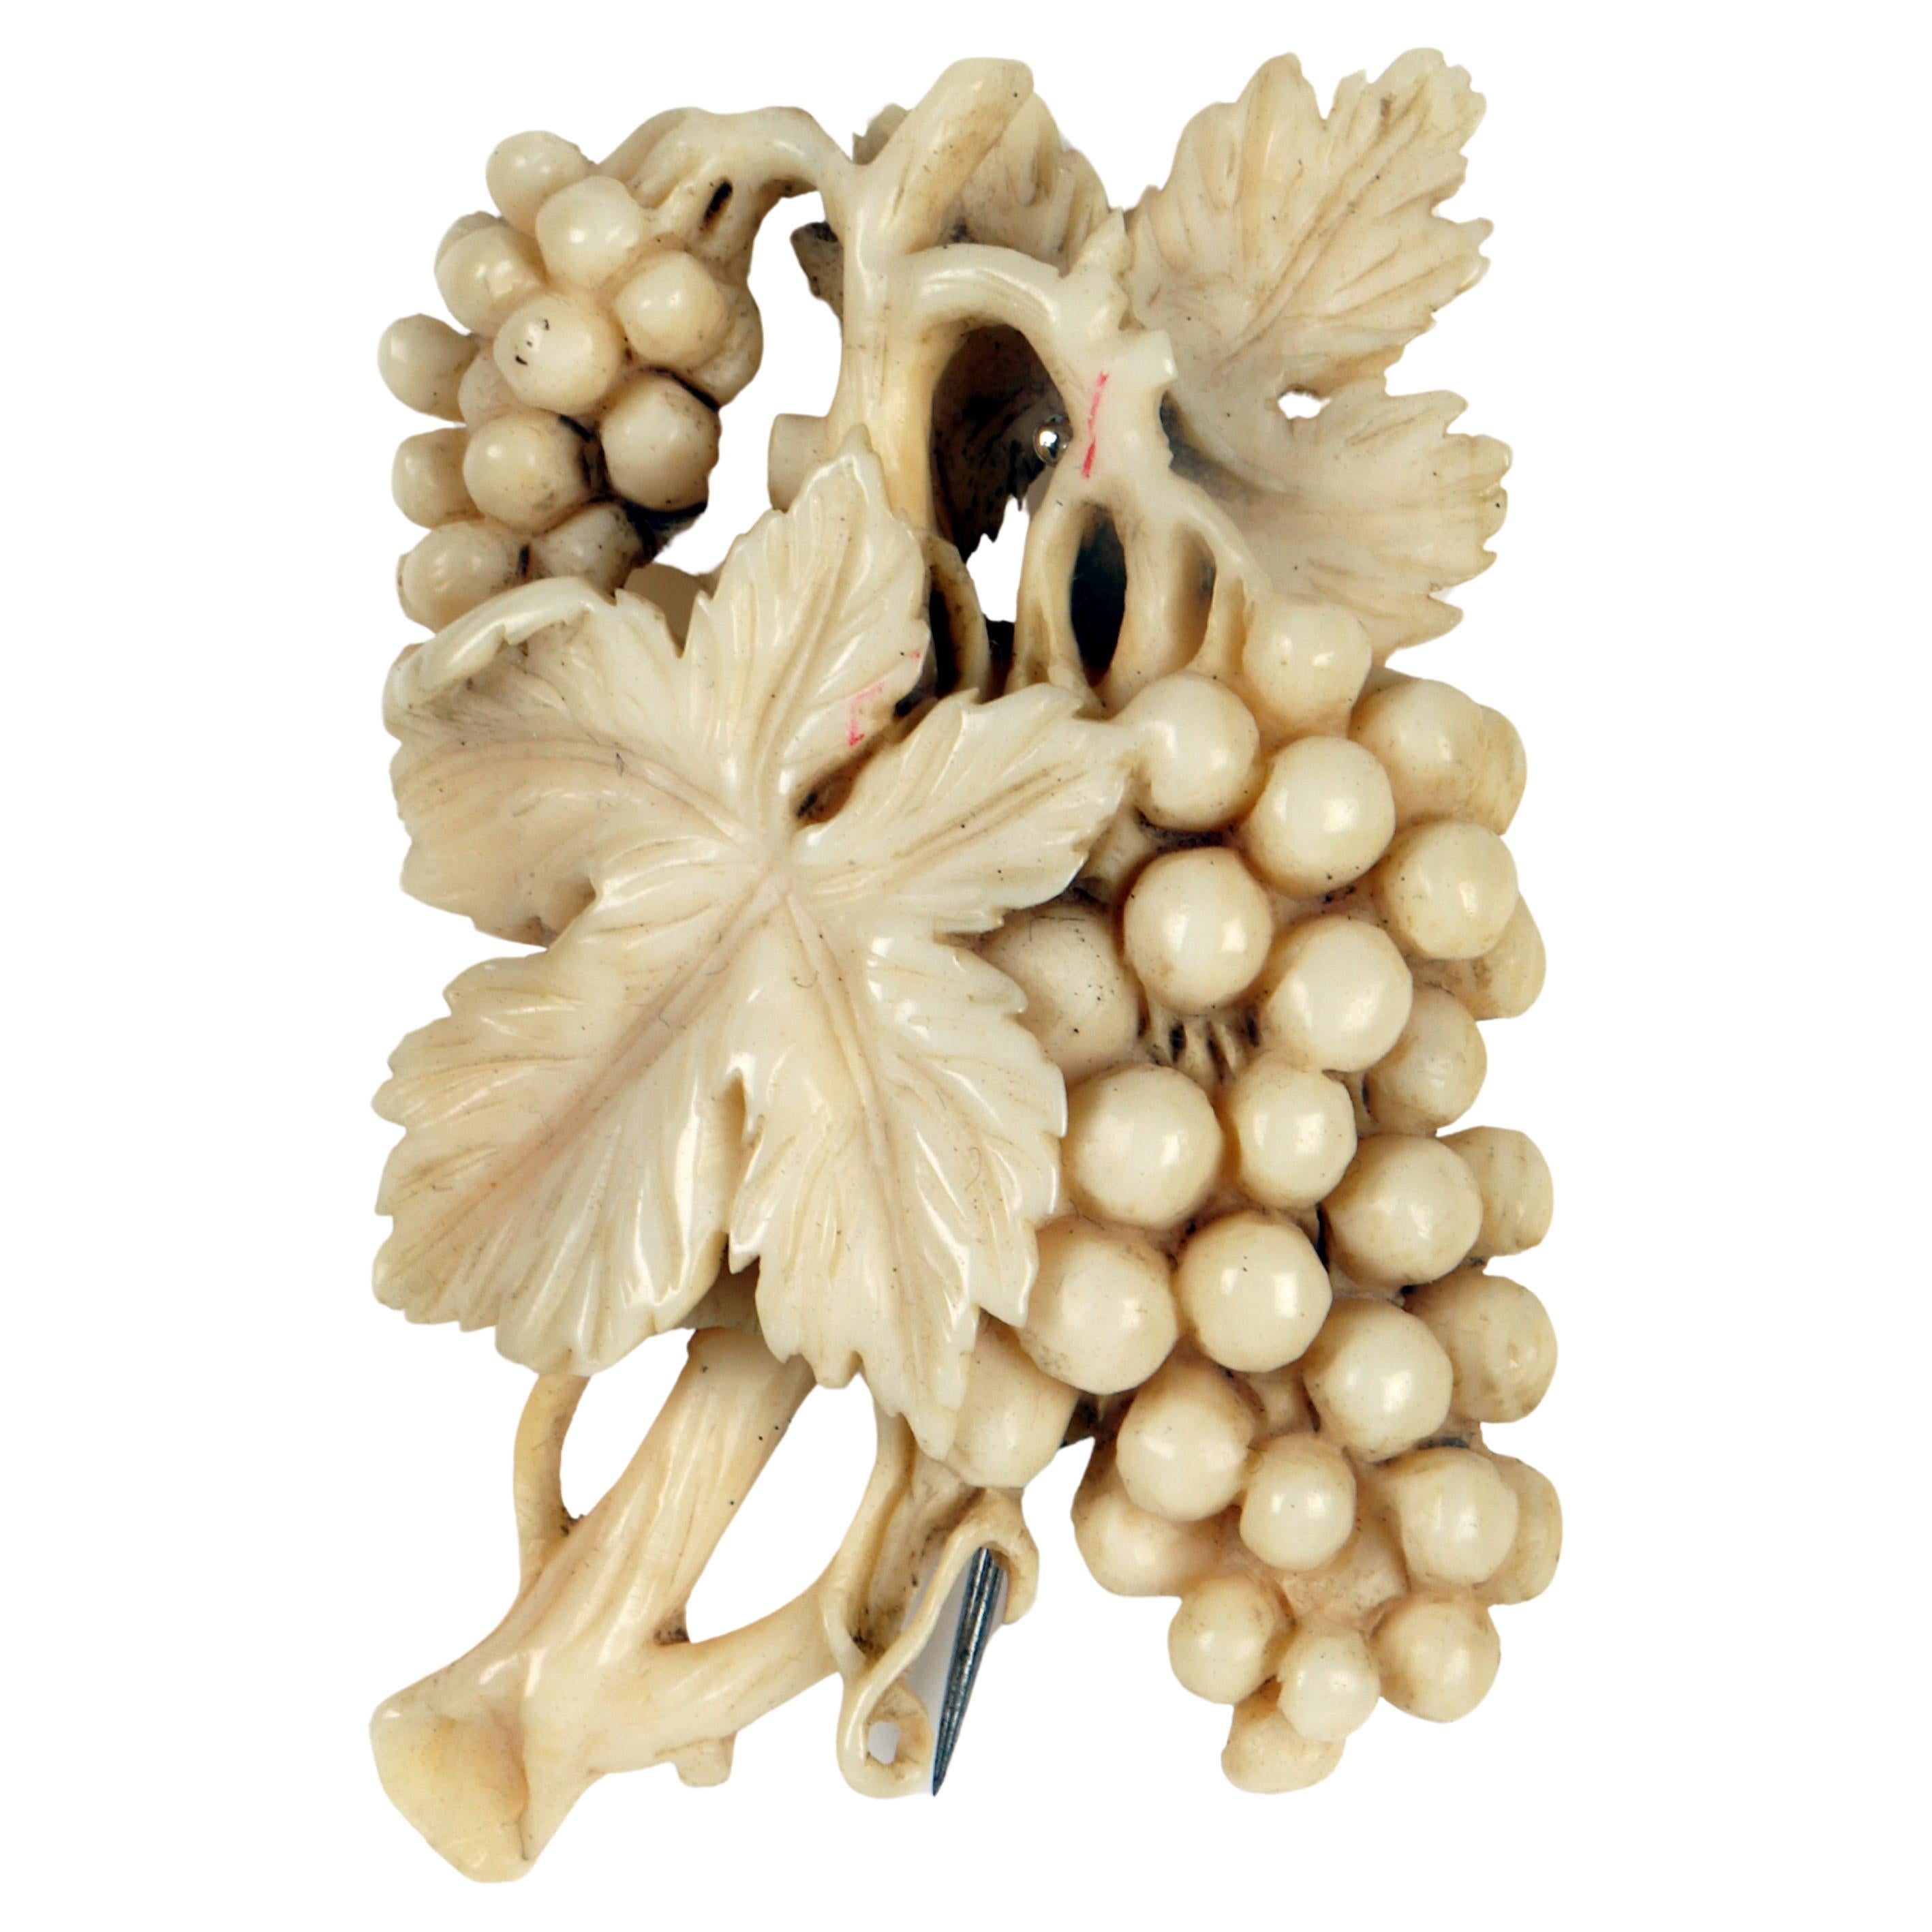 A brooch made of ivory depicting bunches of grapes, England 1890.